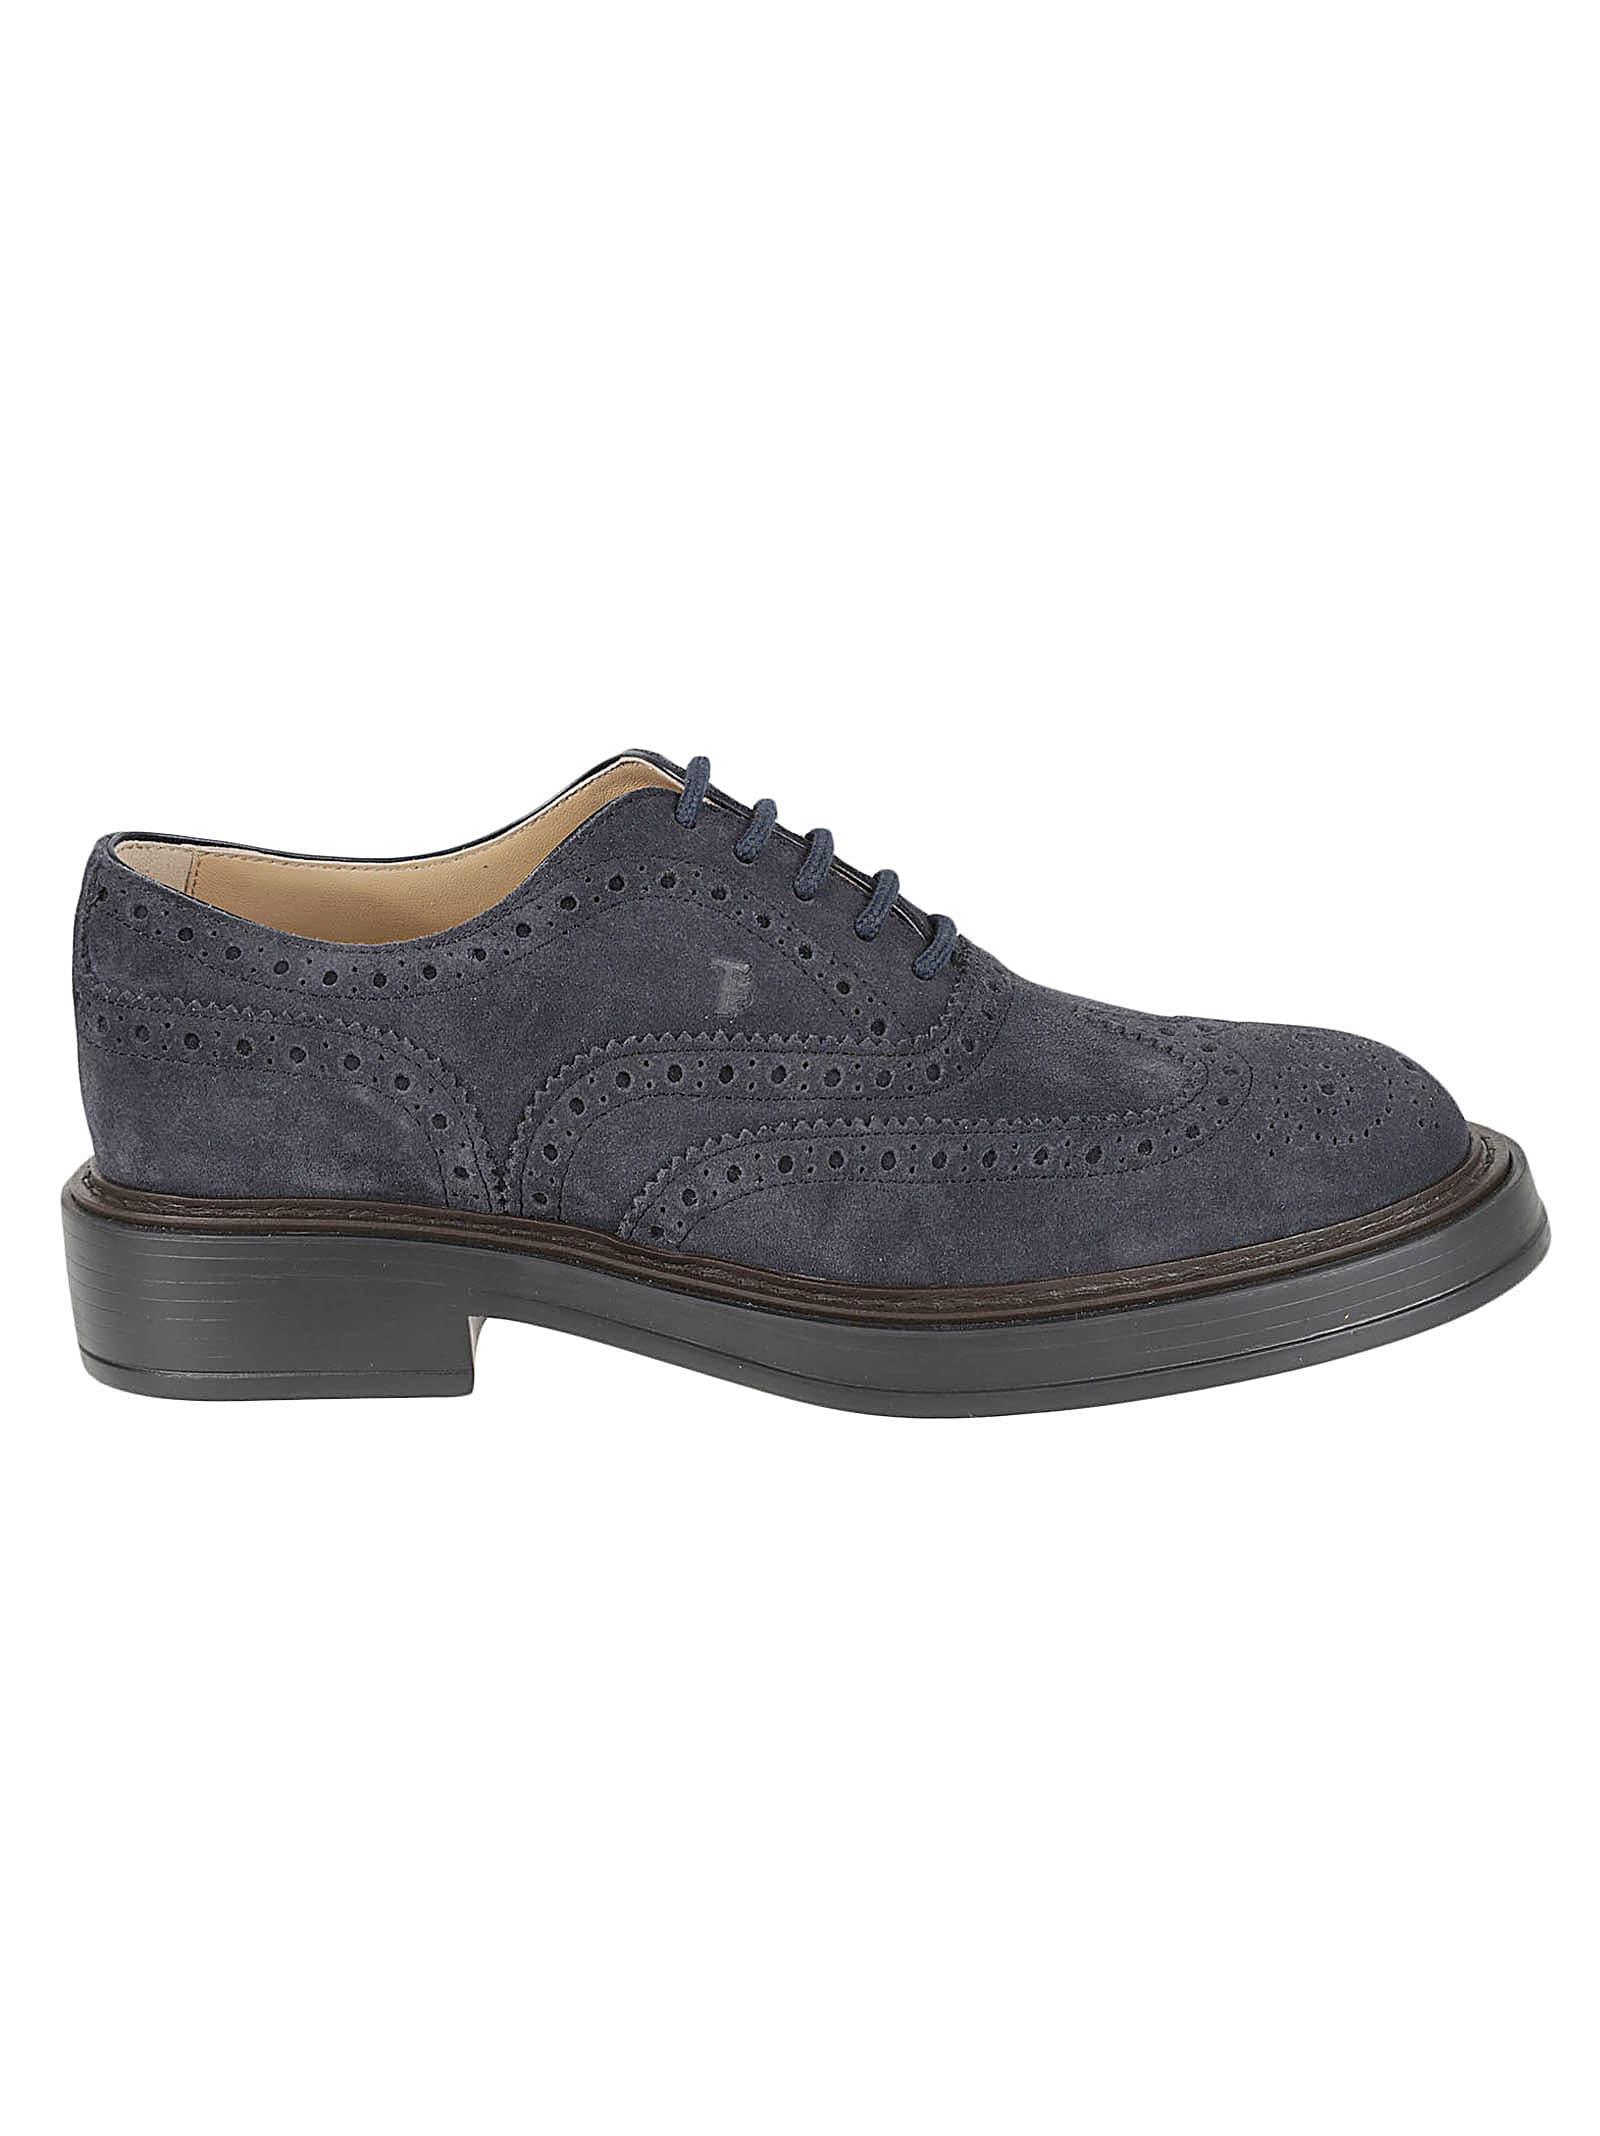 Tod's Francesina Bucature Extralight Derby Shoes